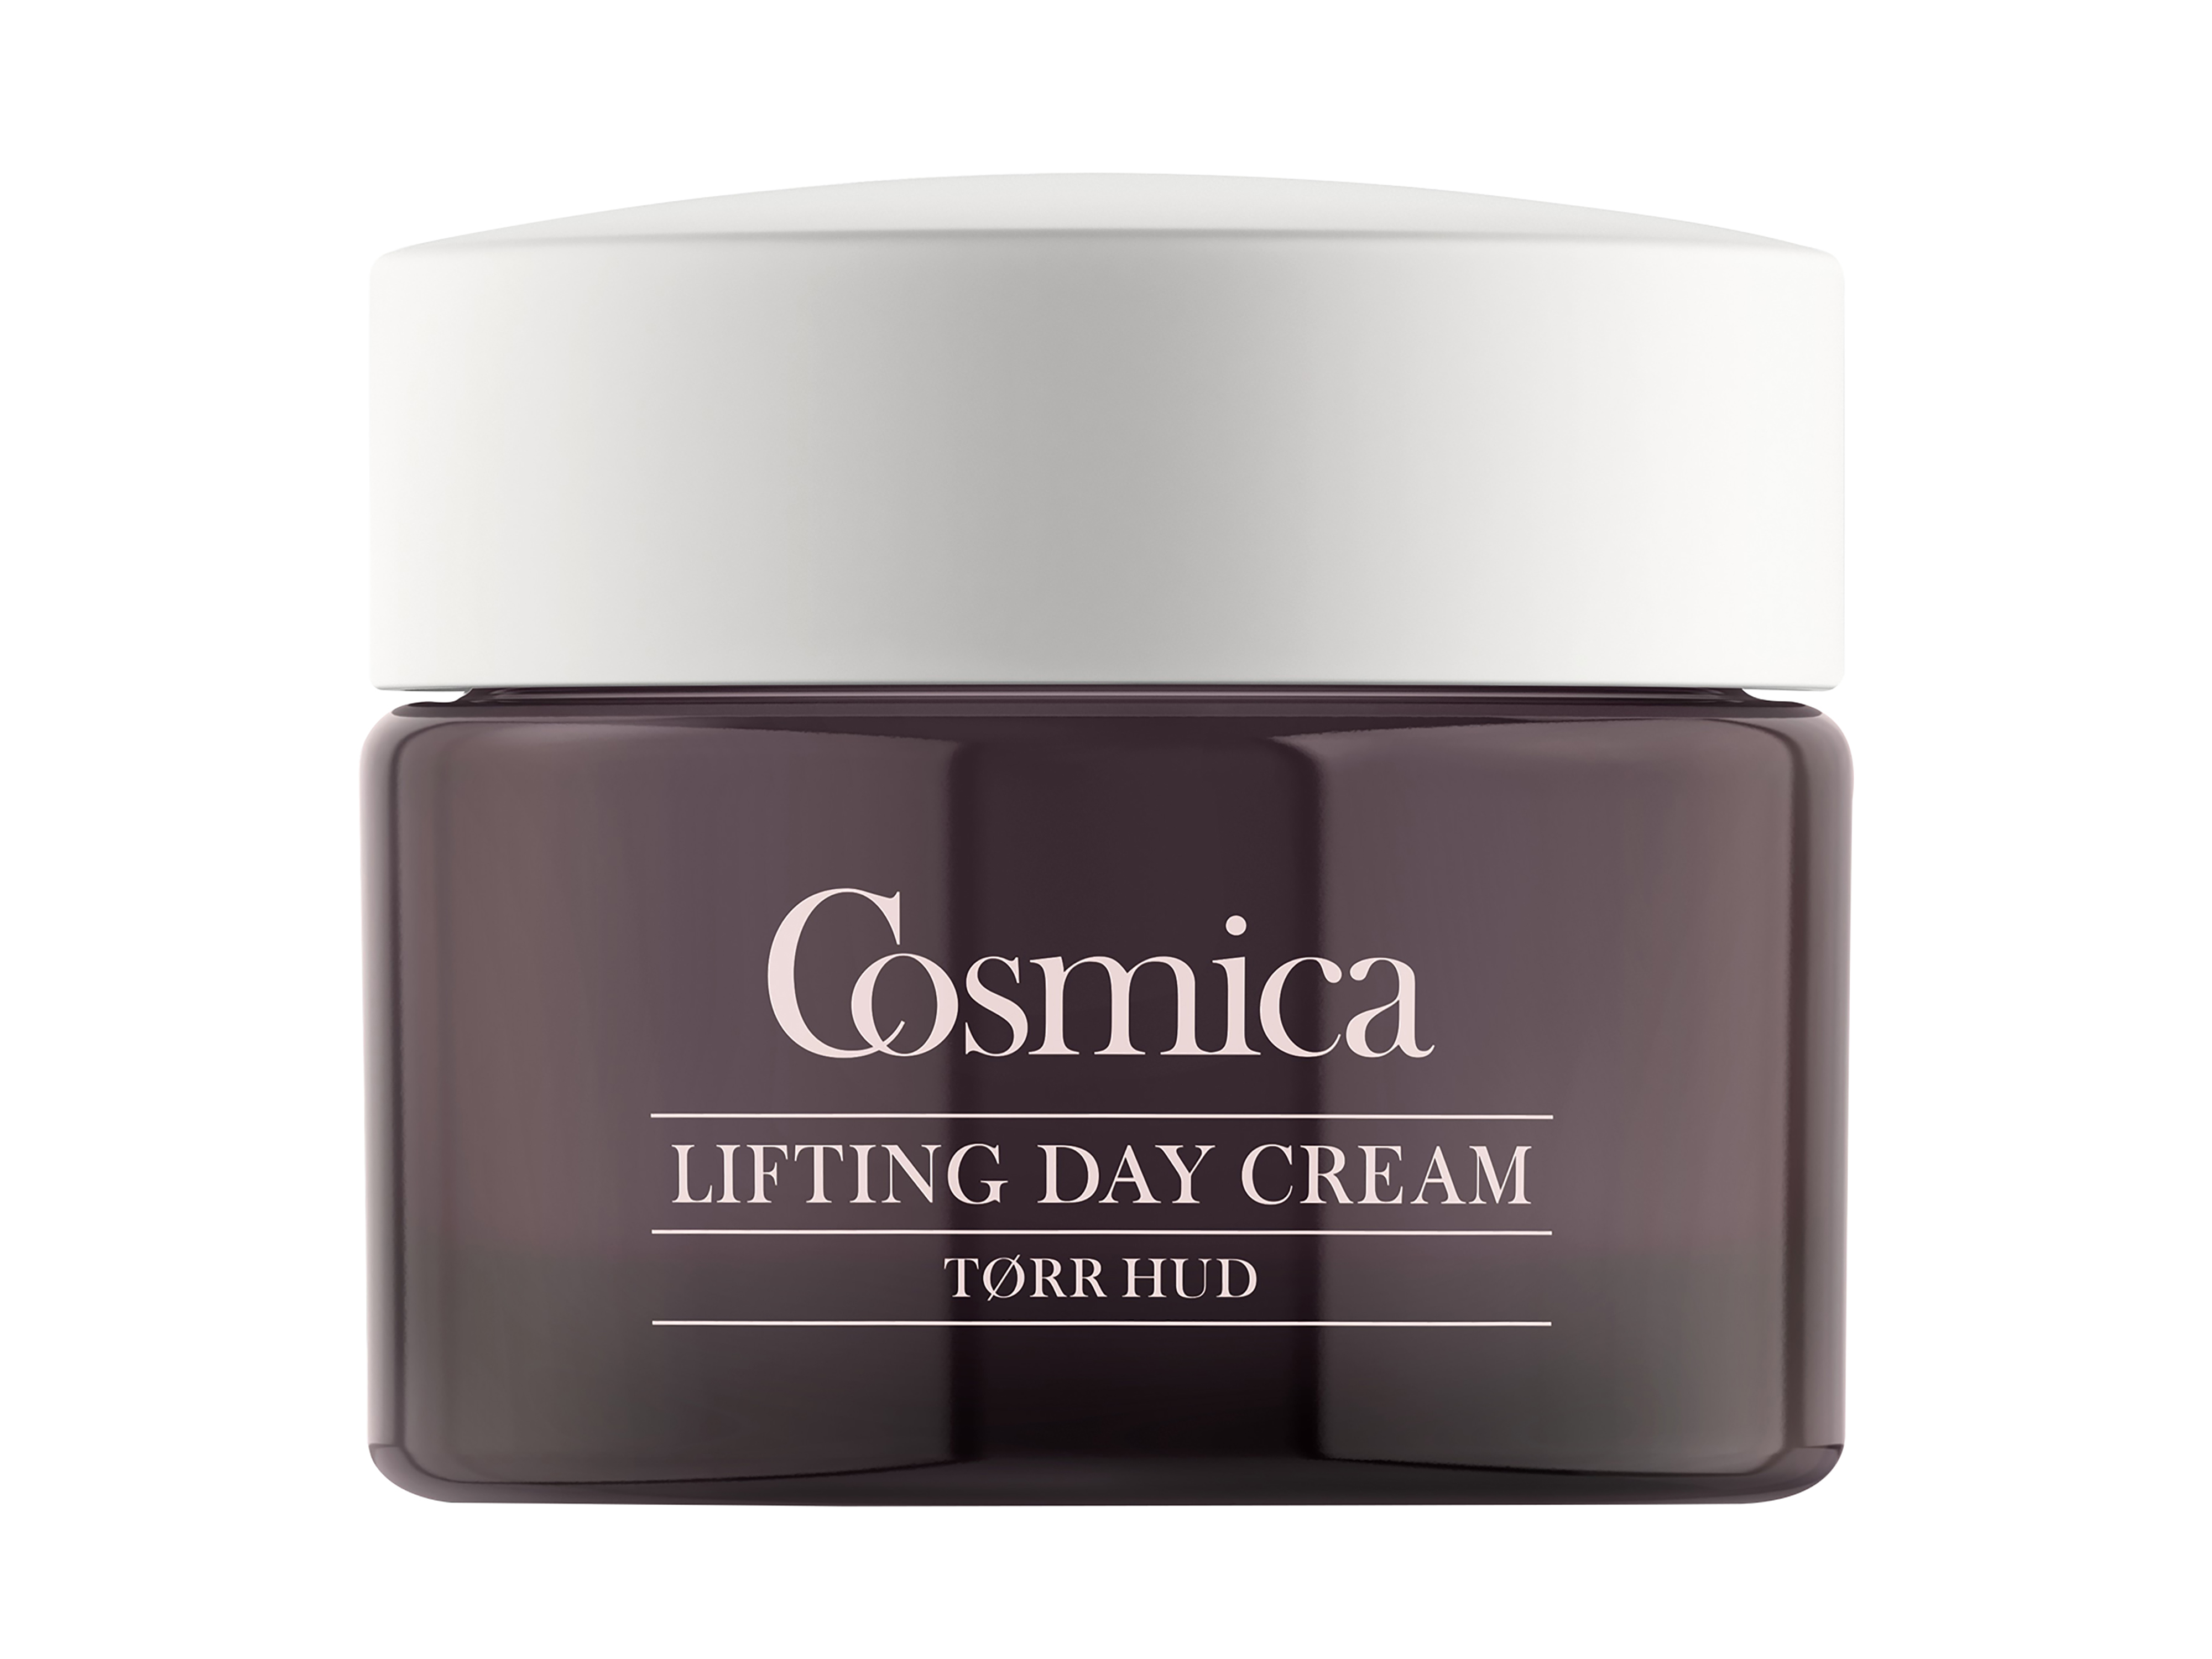 Cosmica Face Anti-age Lifting Daycream, Tørr hud 50 ml